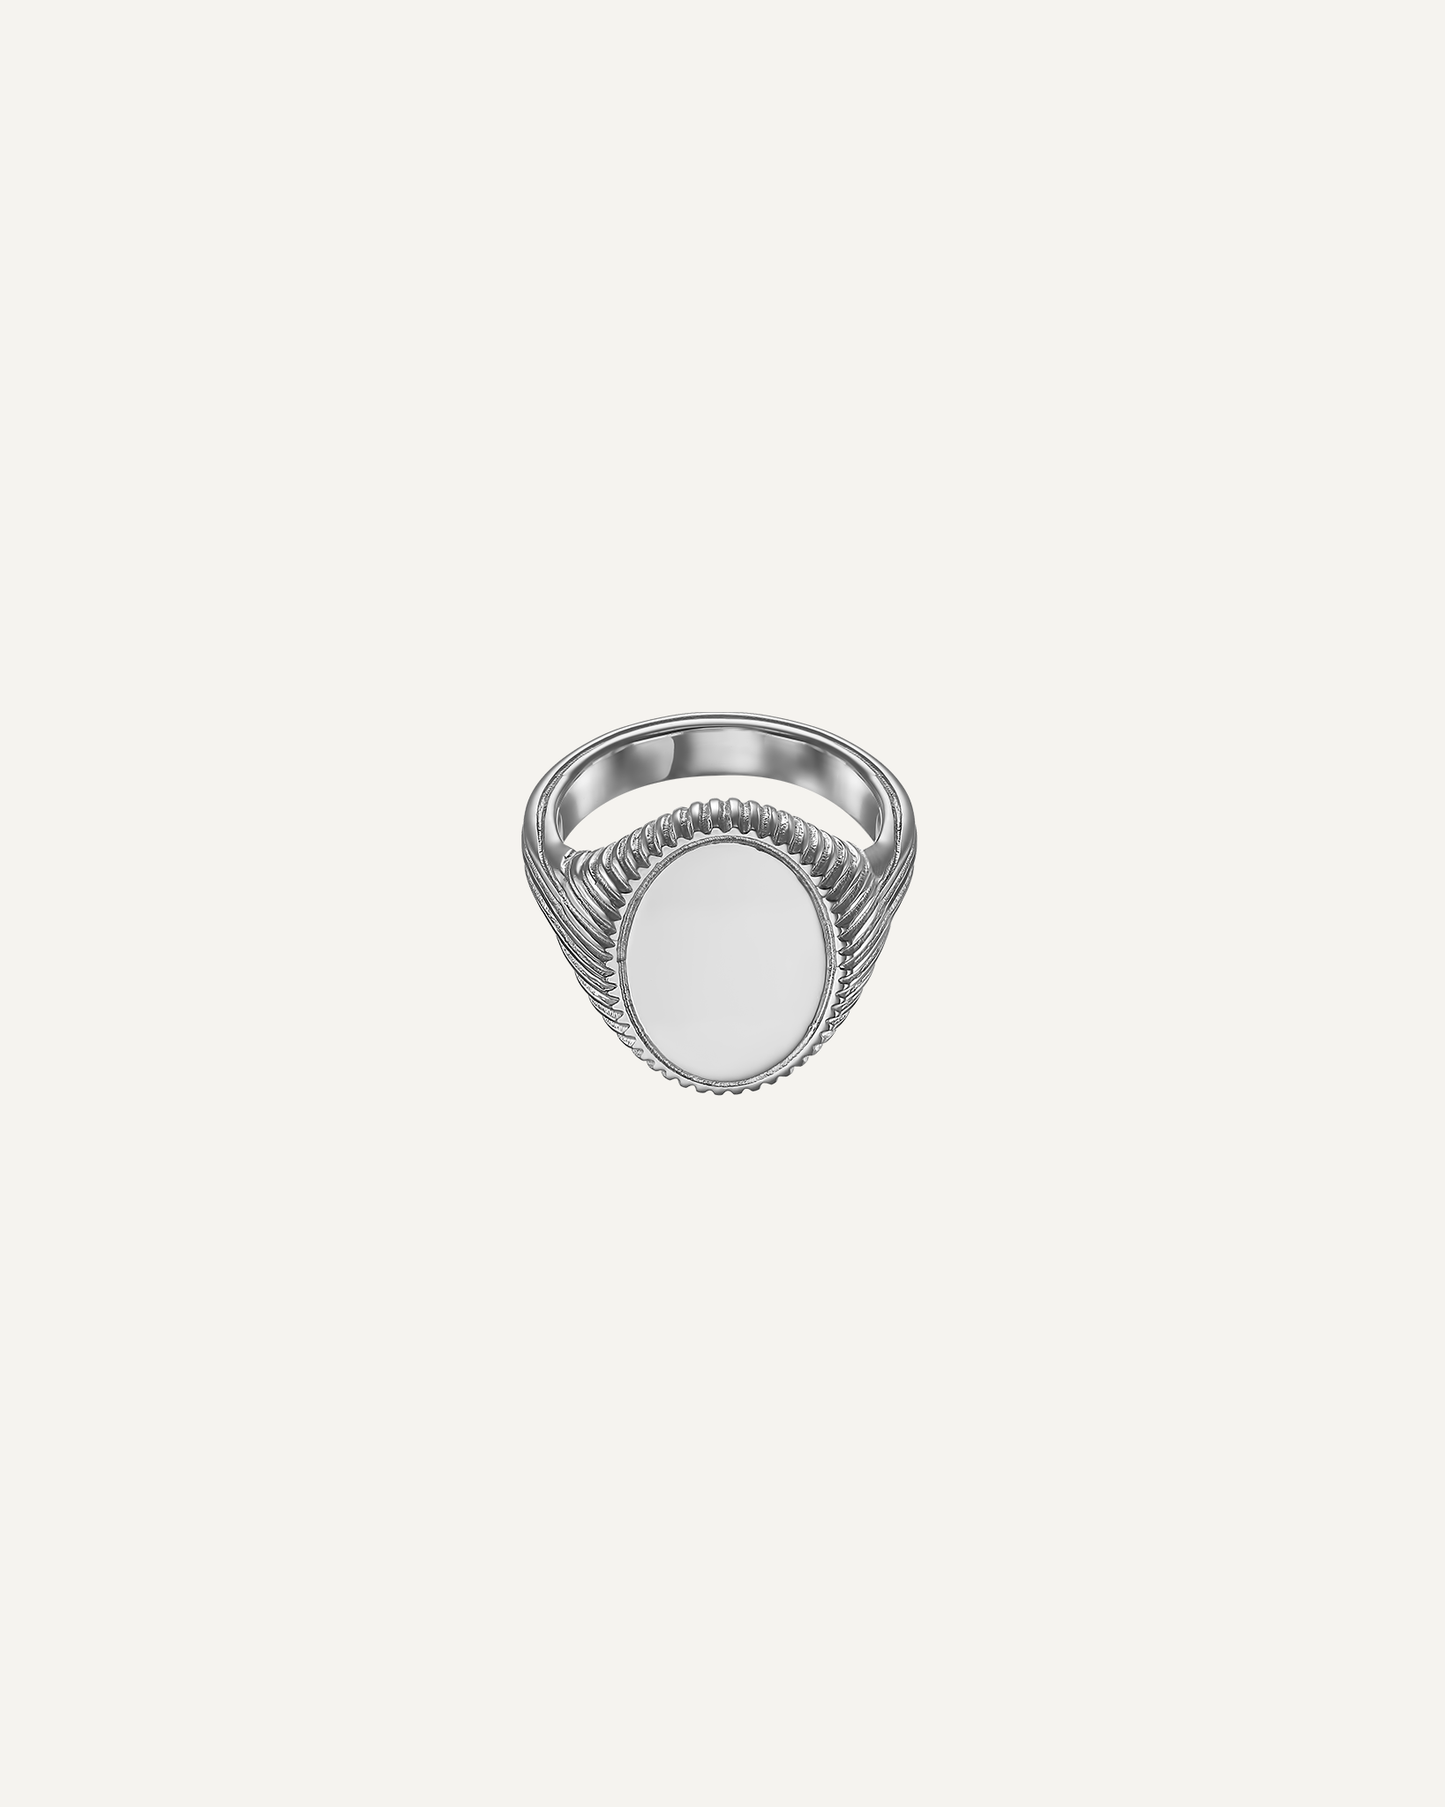 Structural signet ring